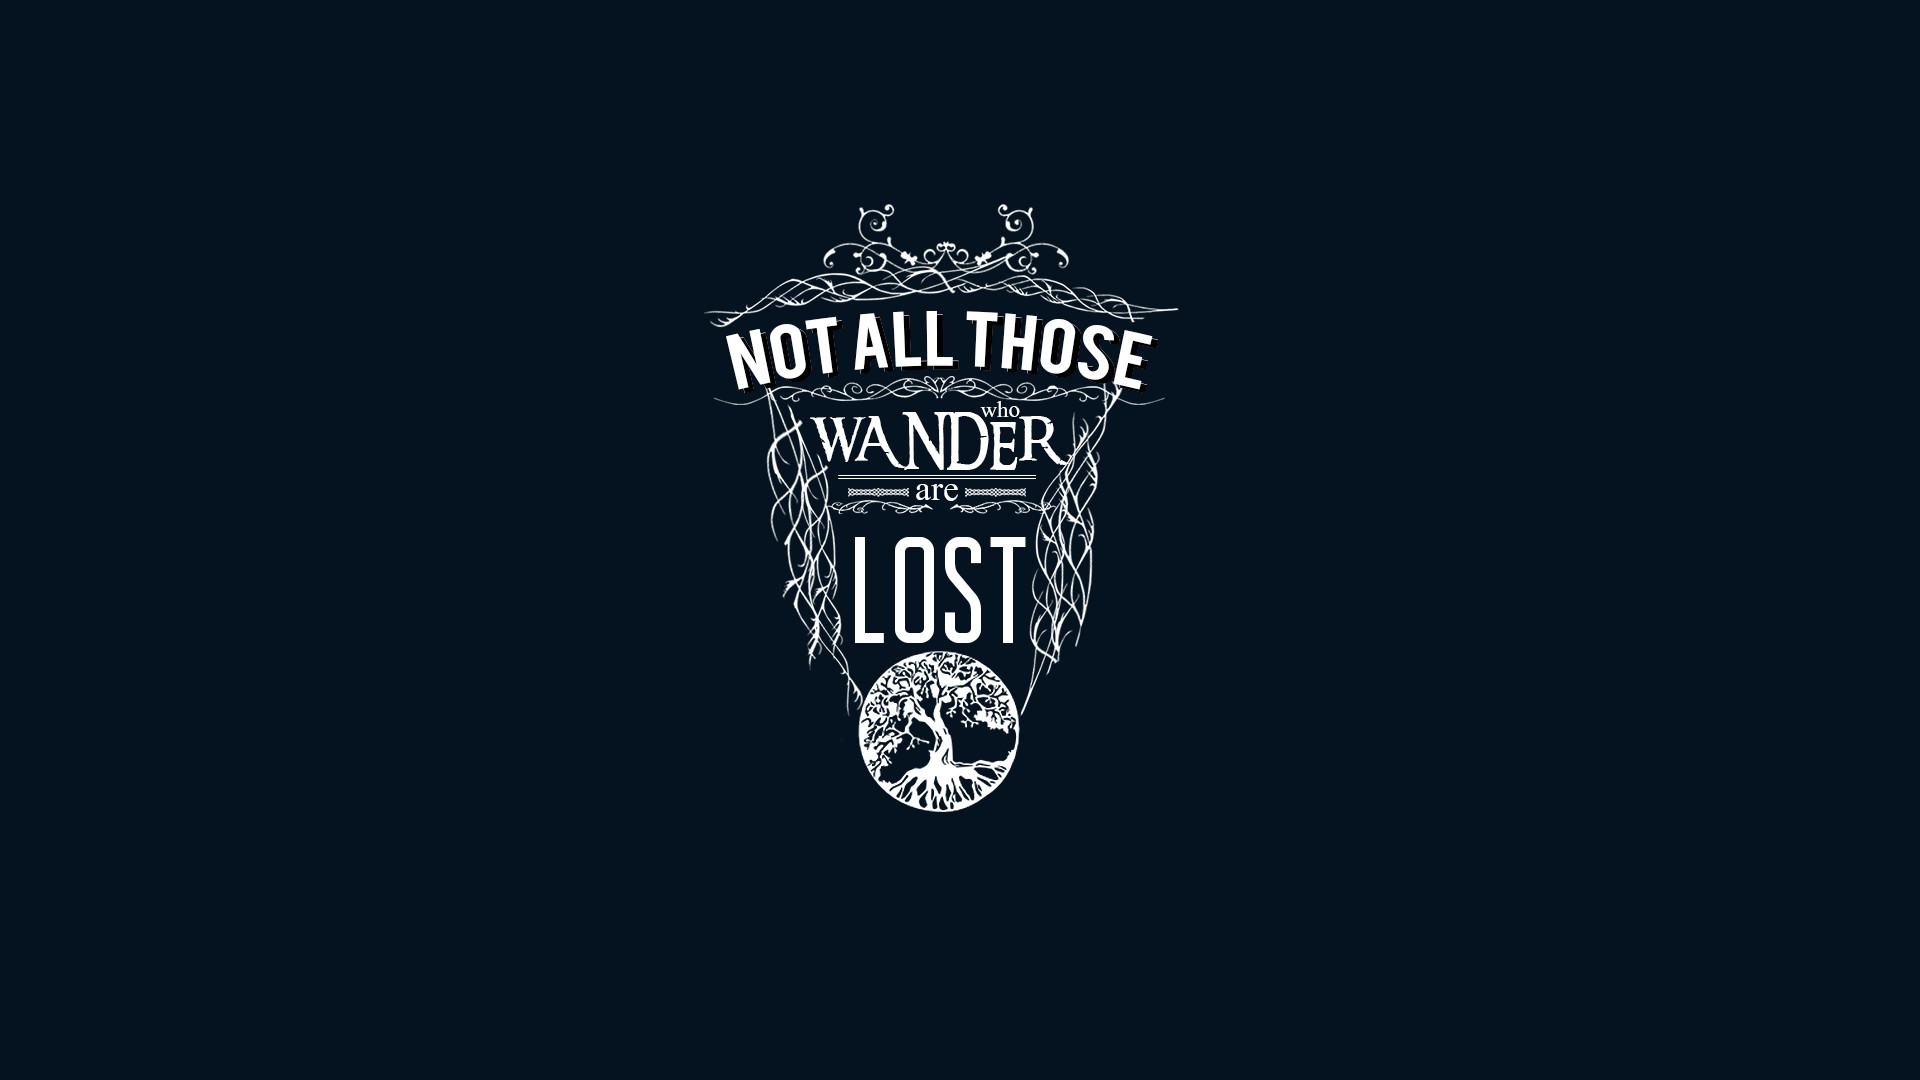 1920x1080 General  J. R. R. Tolkien quote typography